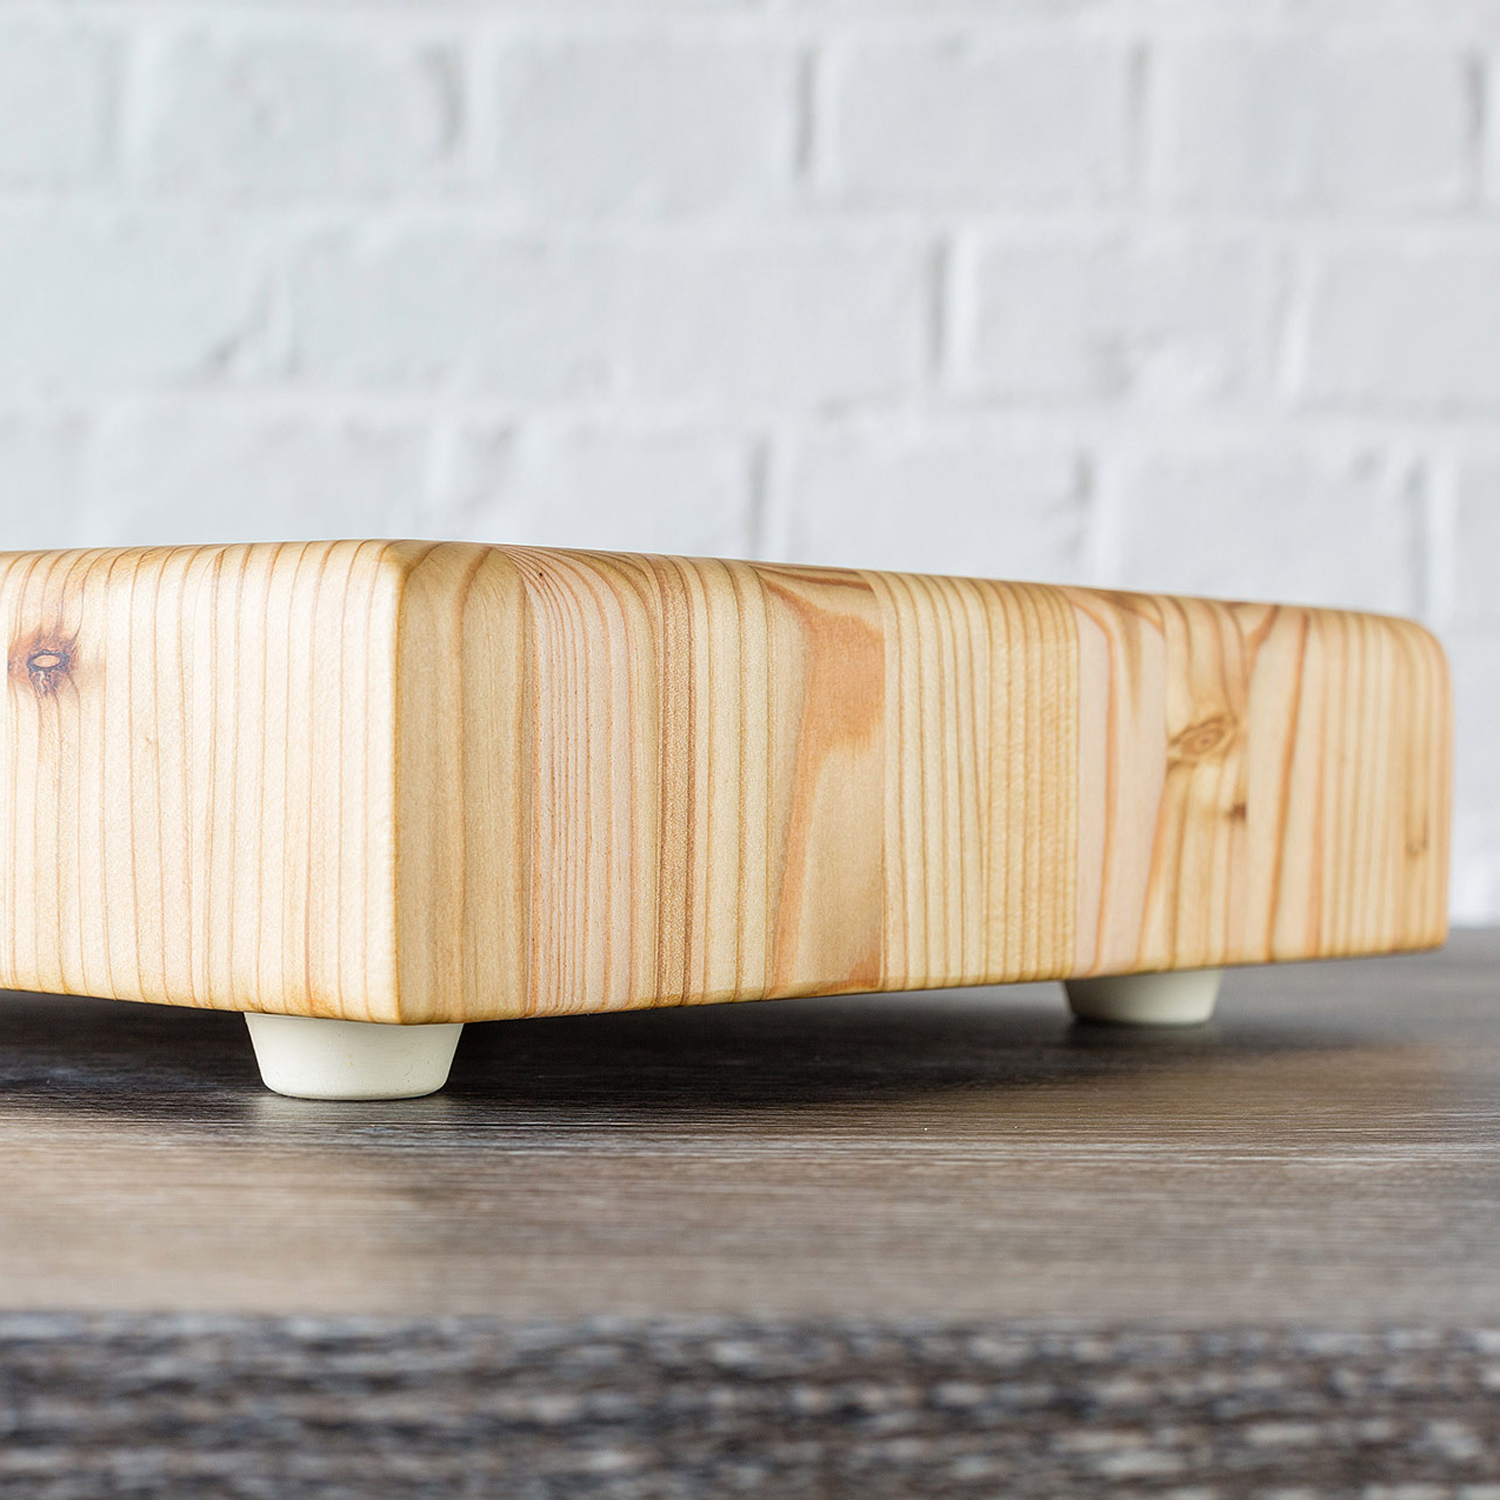 Larch Wood: Square Cheese Board Product Image 3 of 5